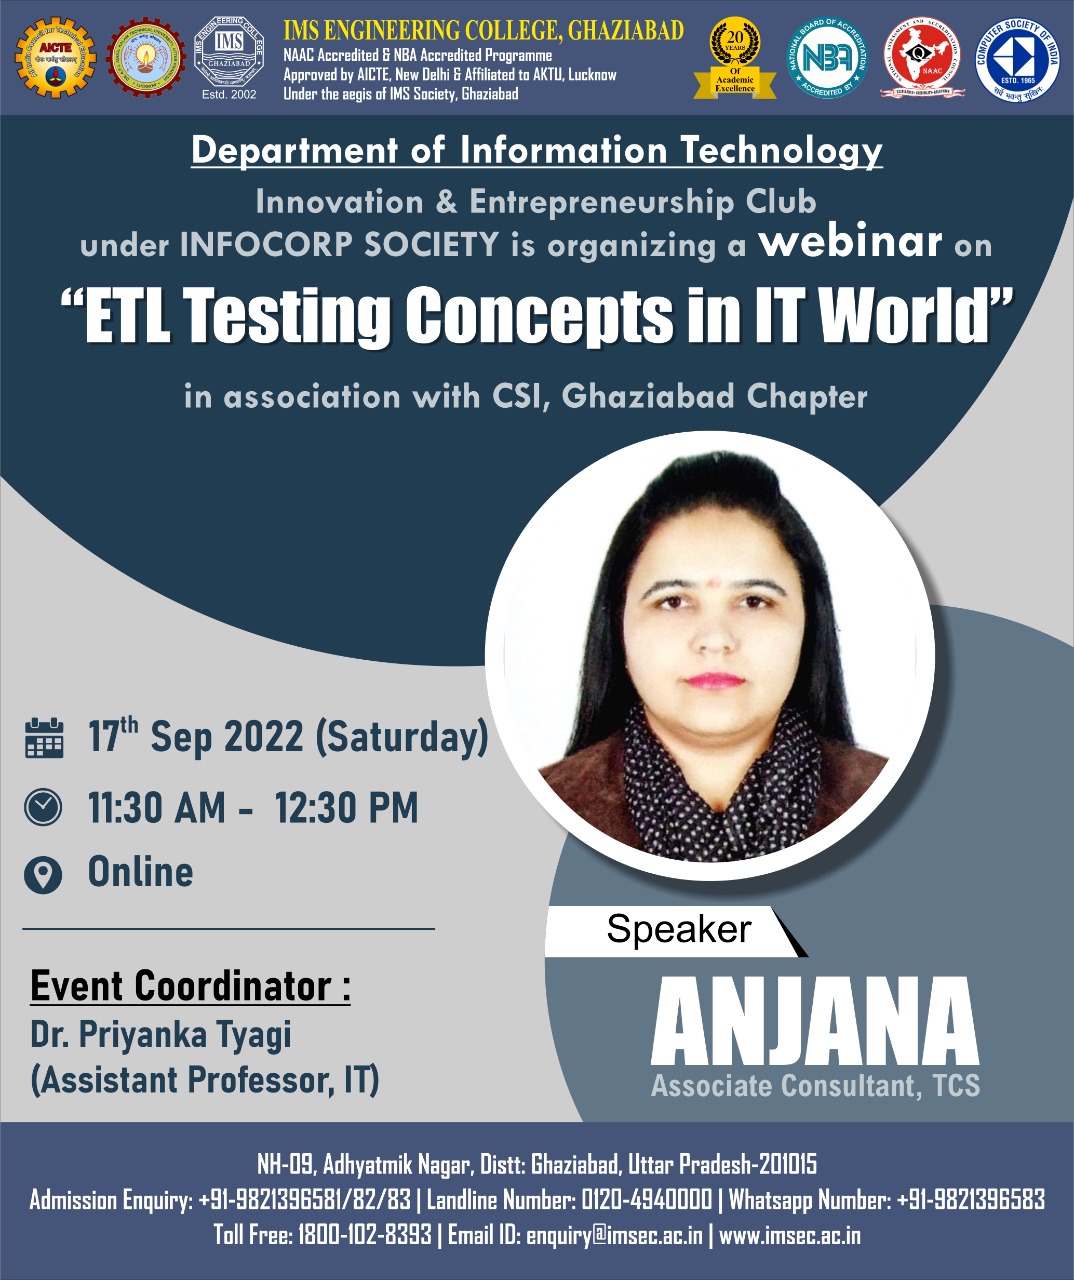 Webinar on ETL Testing concepts in IT world in association with CSI-Ghaziabad Chapter